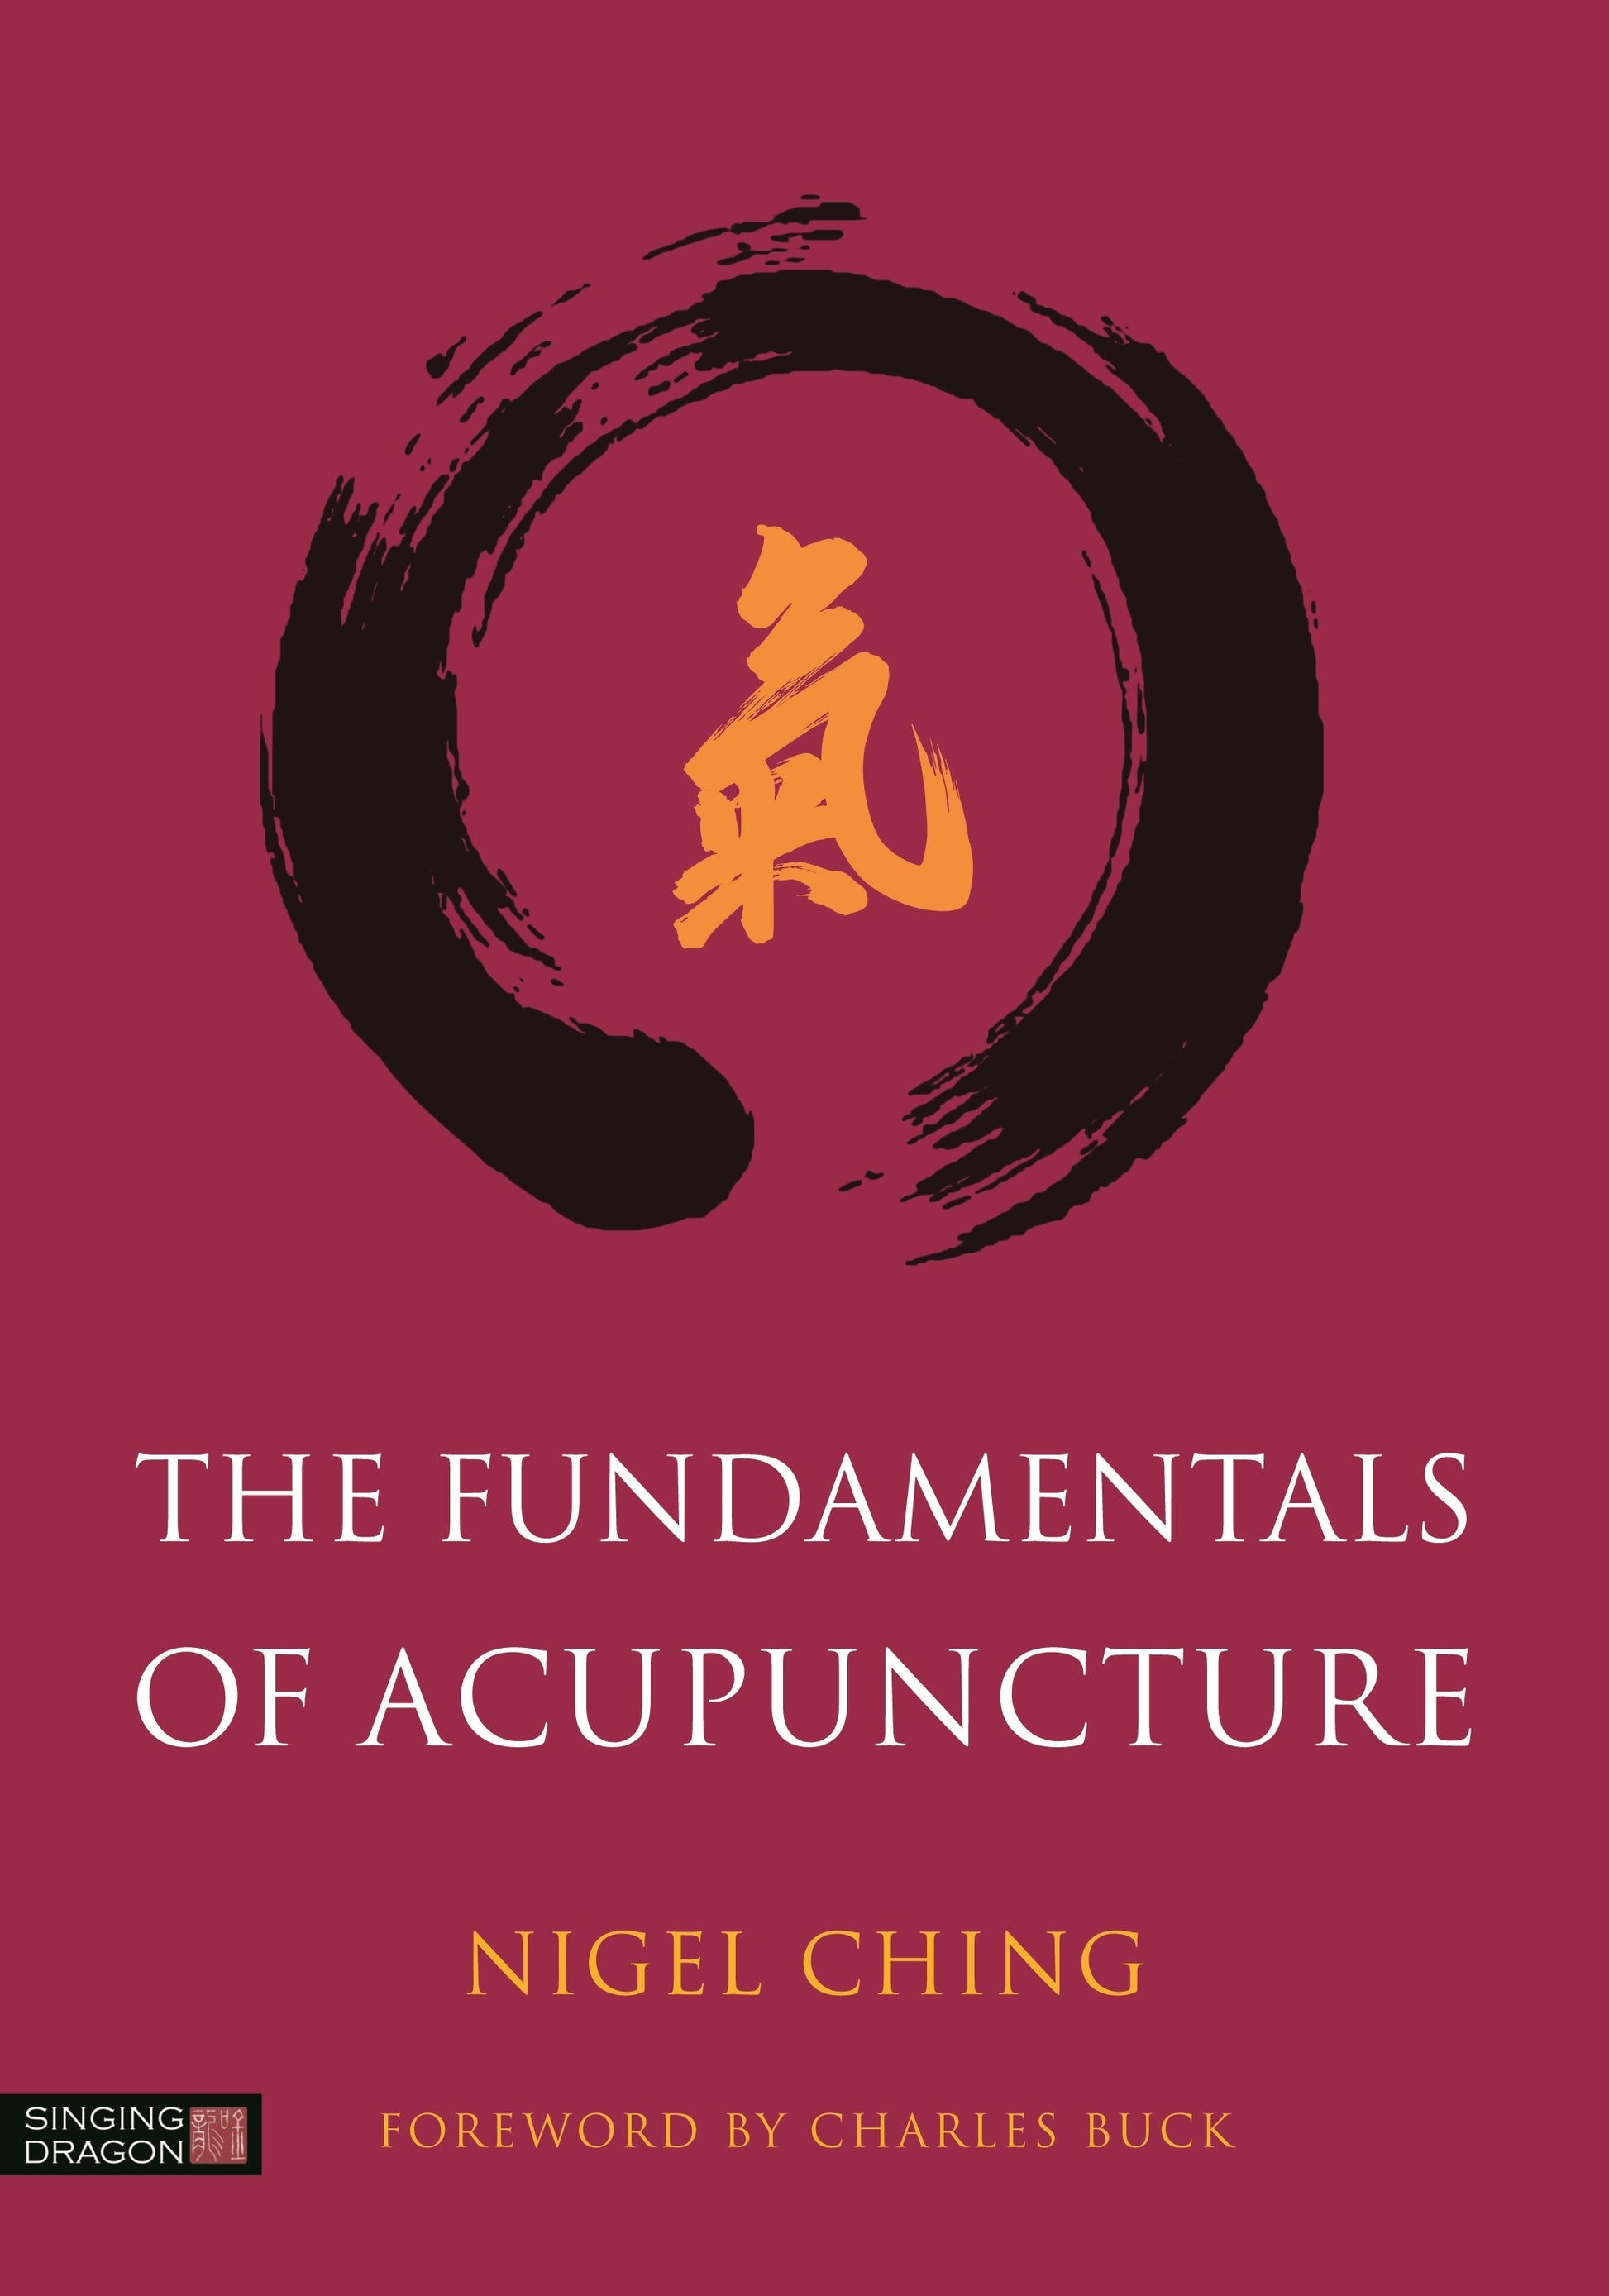 The Fundamentals of Acupuncture by Nigel Ching, Charles Buck